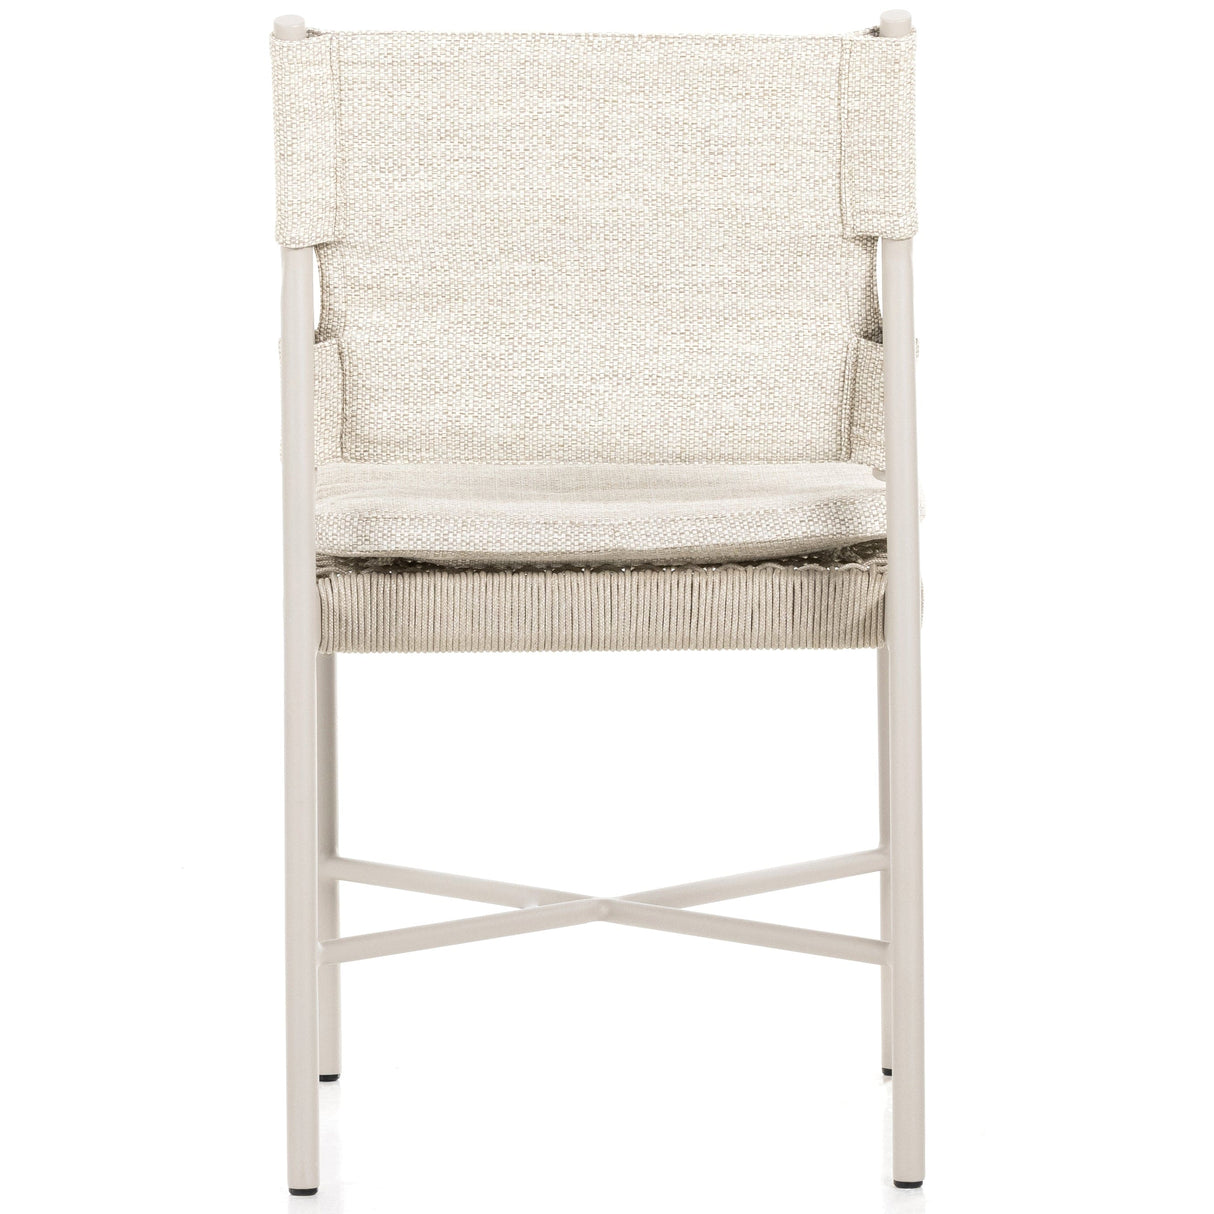 Four Hands Miller Outdoor Dining Chair Outdoor Furniture